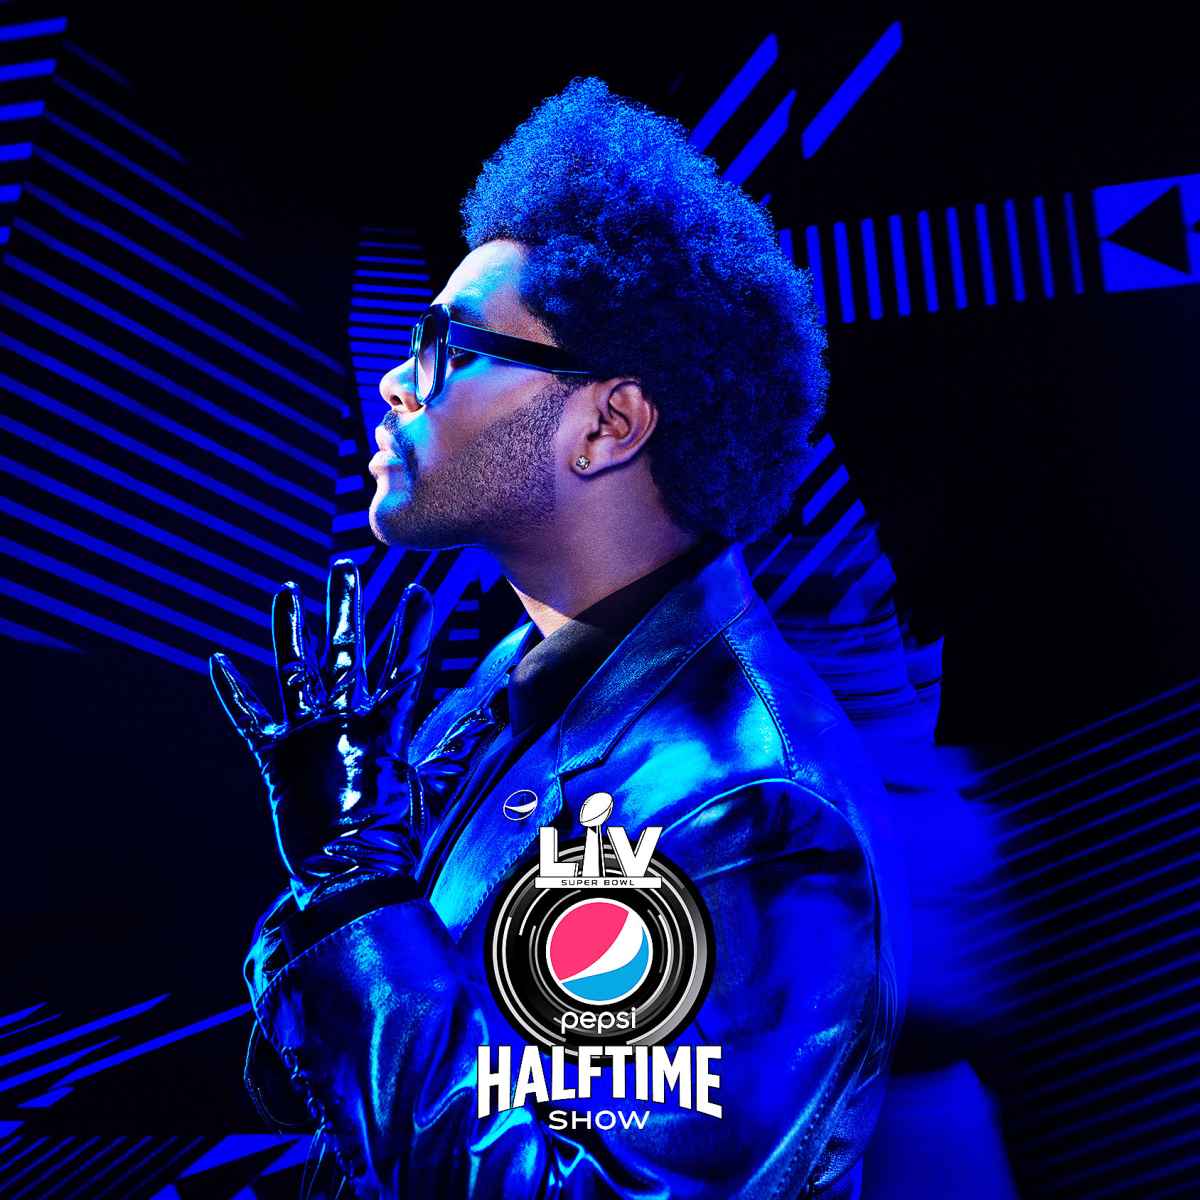 Super Bowl 55: The Weeknd to Headline Halftime Show on Feb 7, 2021